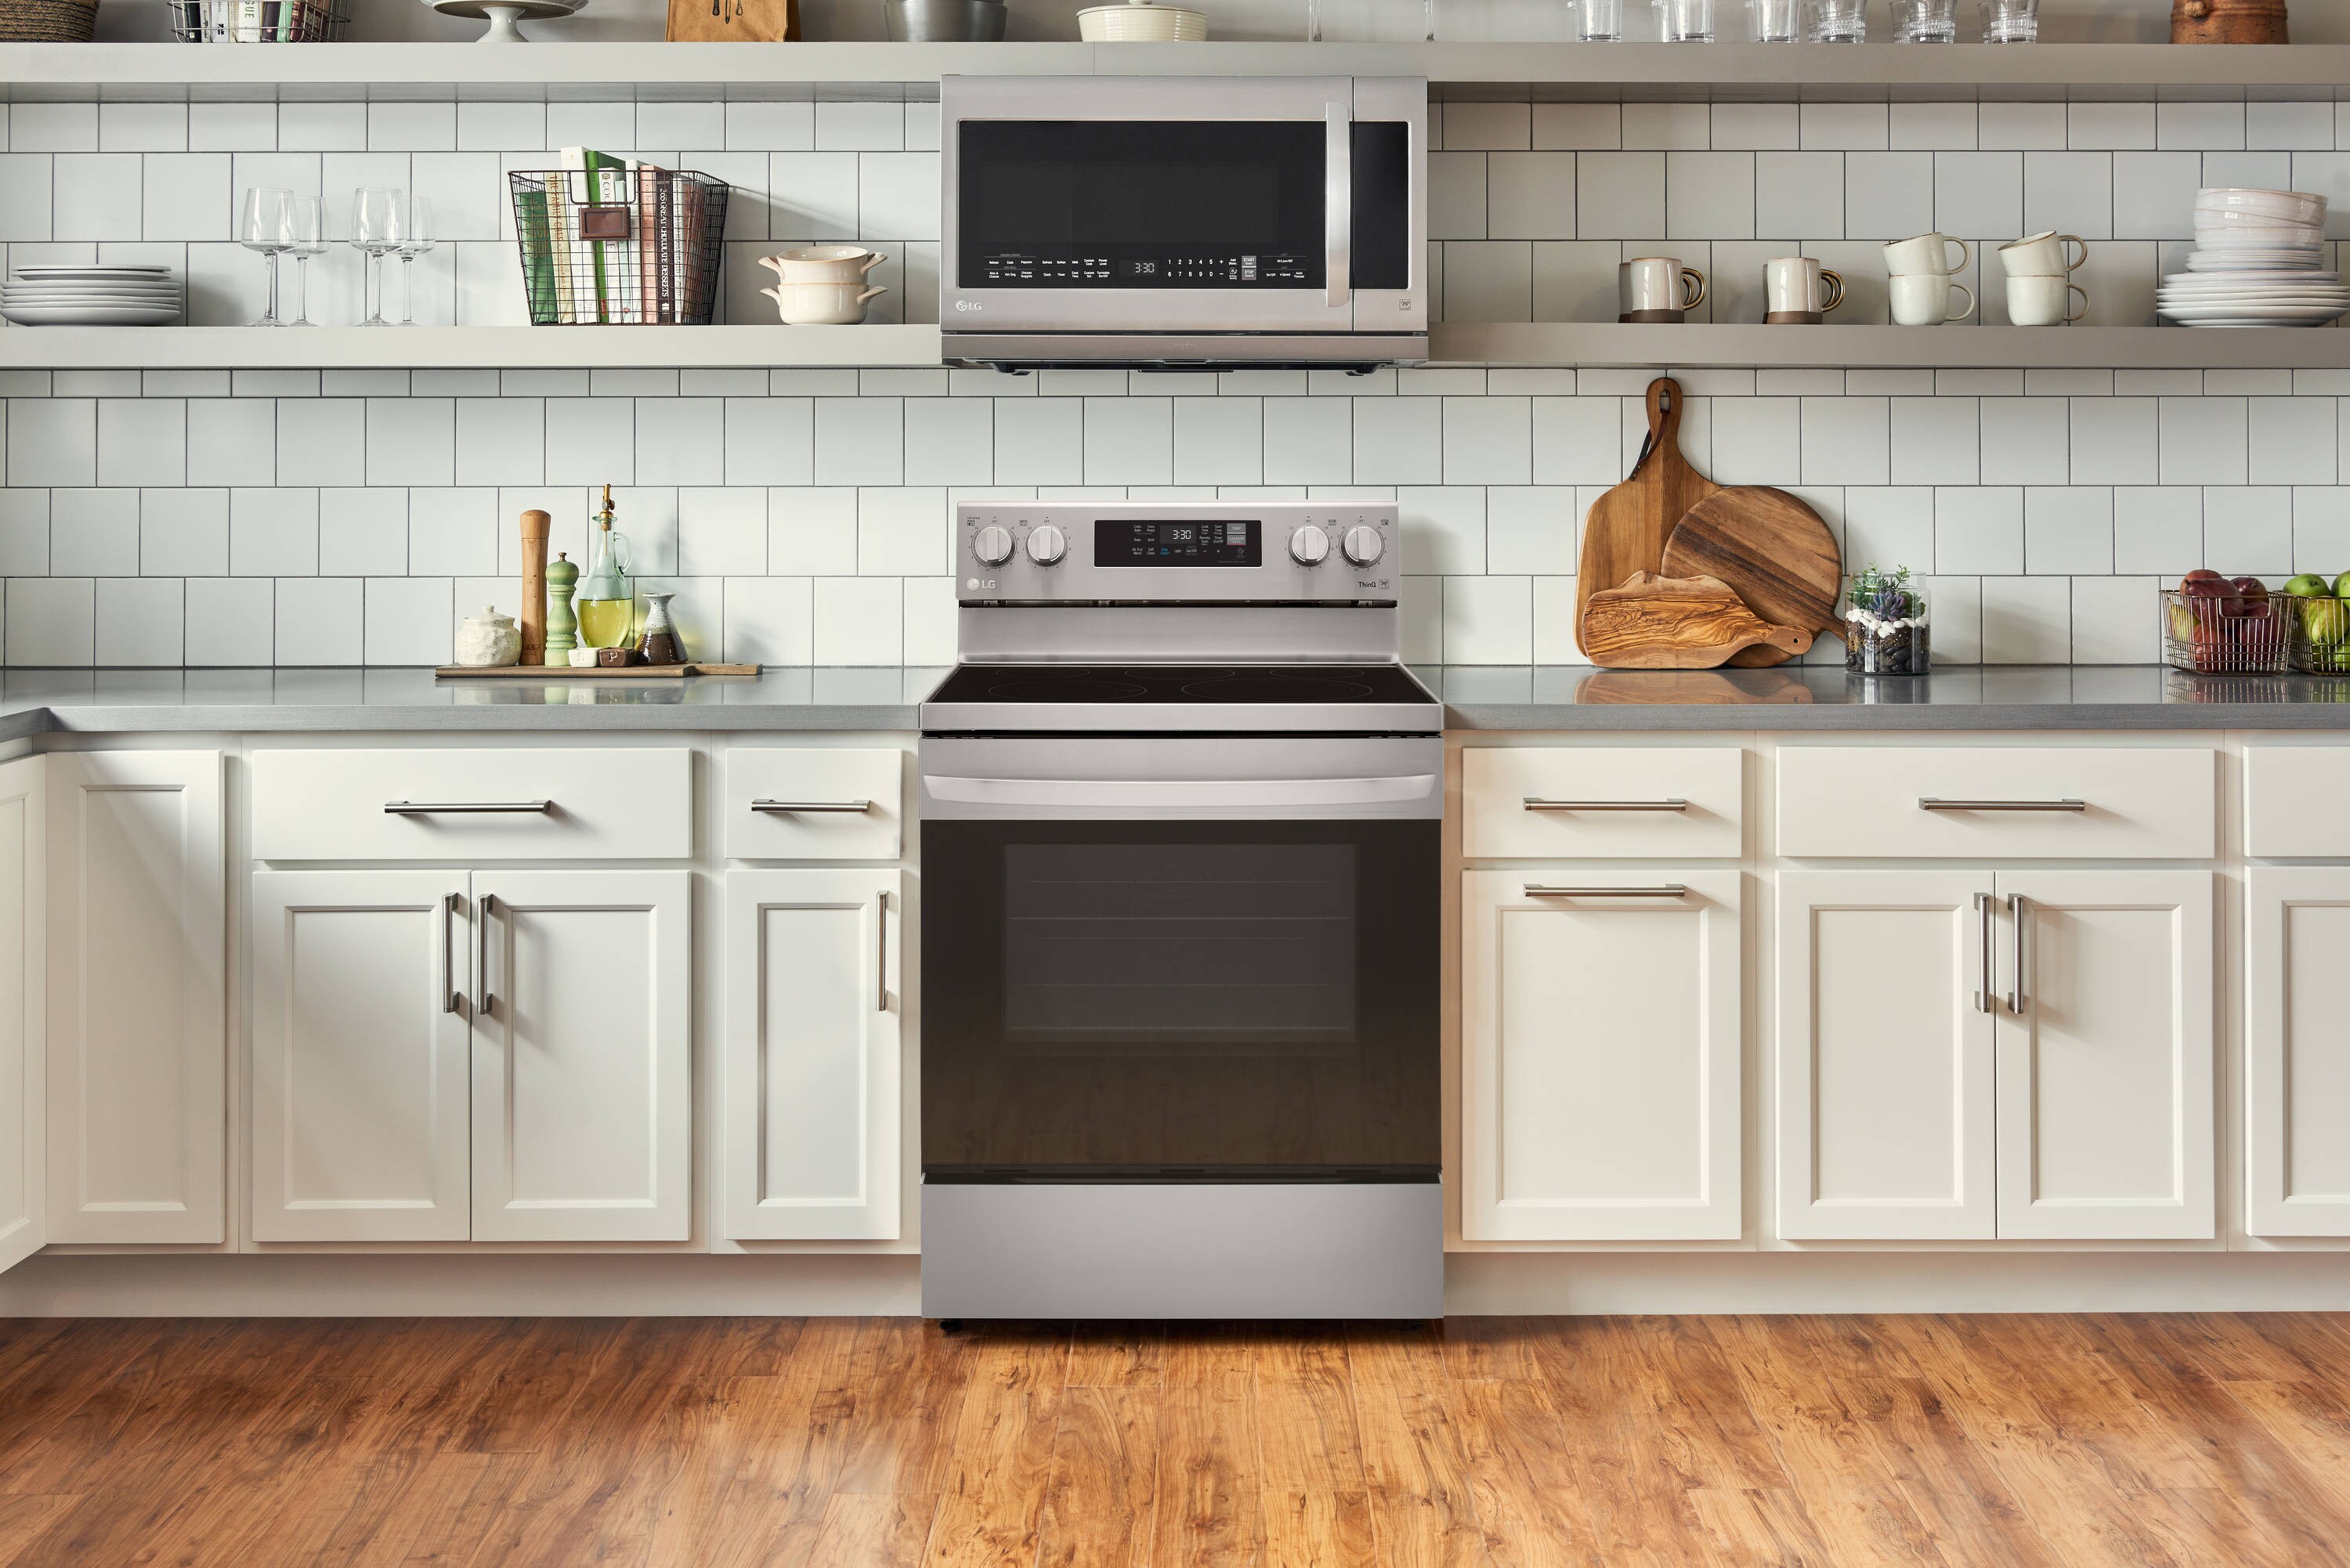 LREL6323S LG 30 WiFi Enabled 6.3 cu.ft. Electric Range with